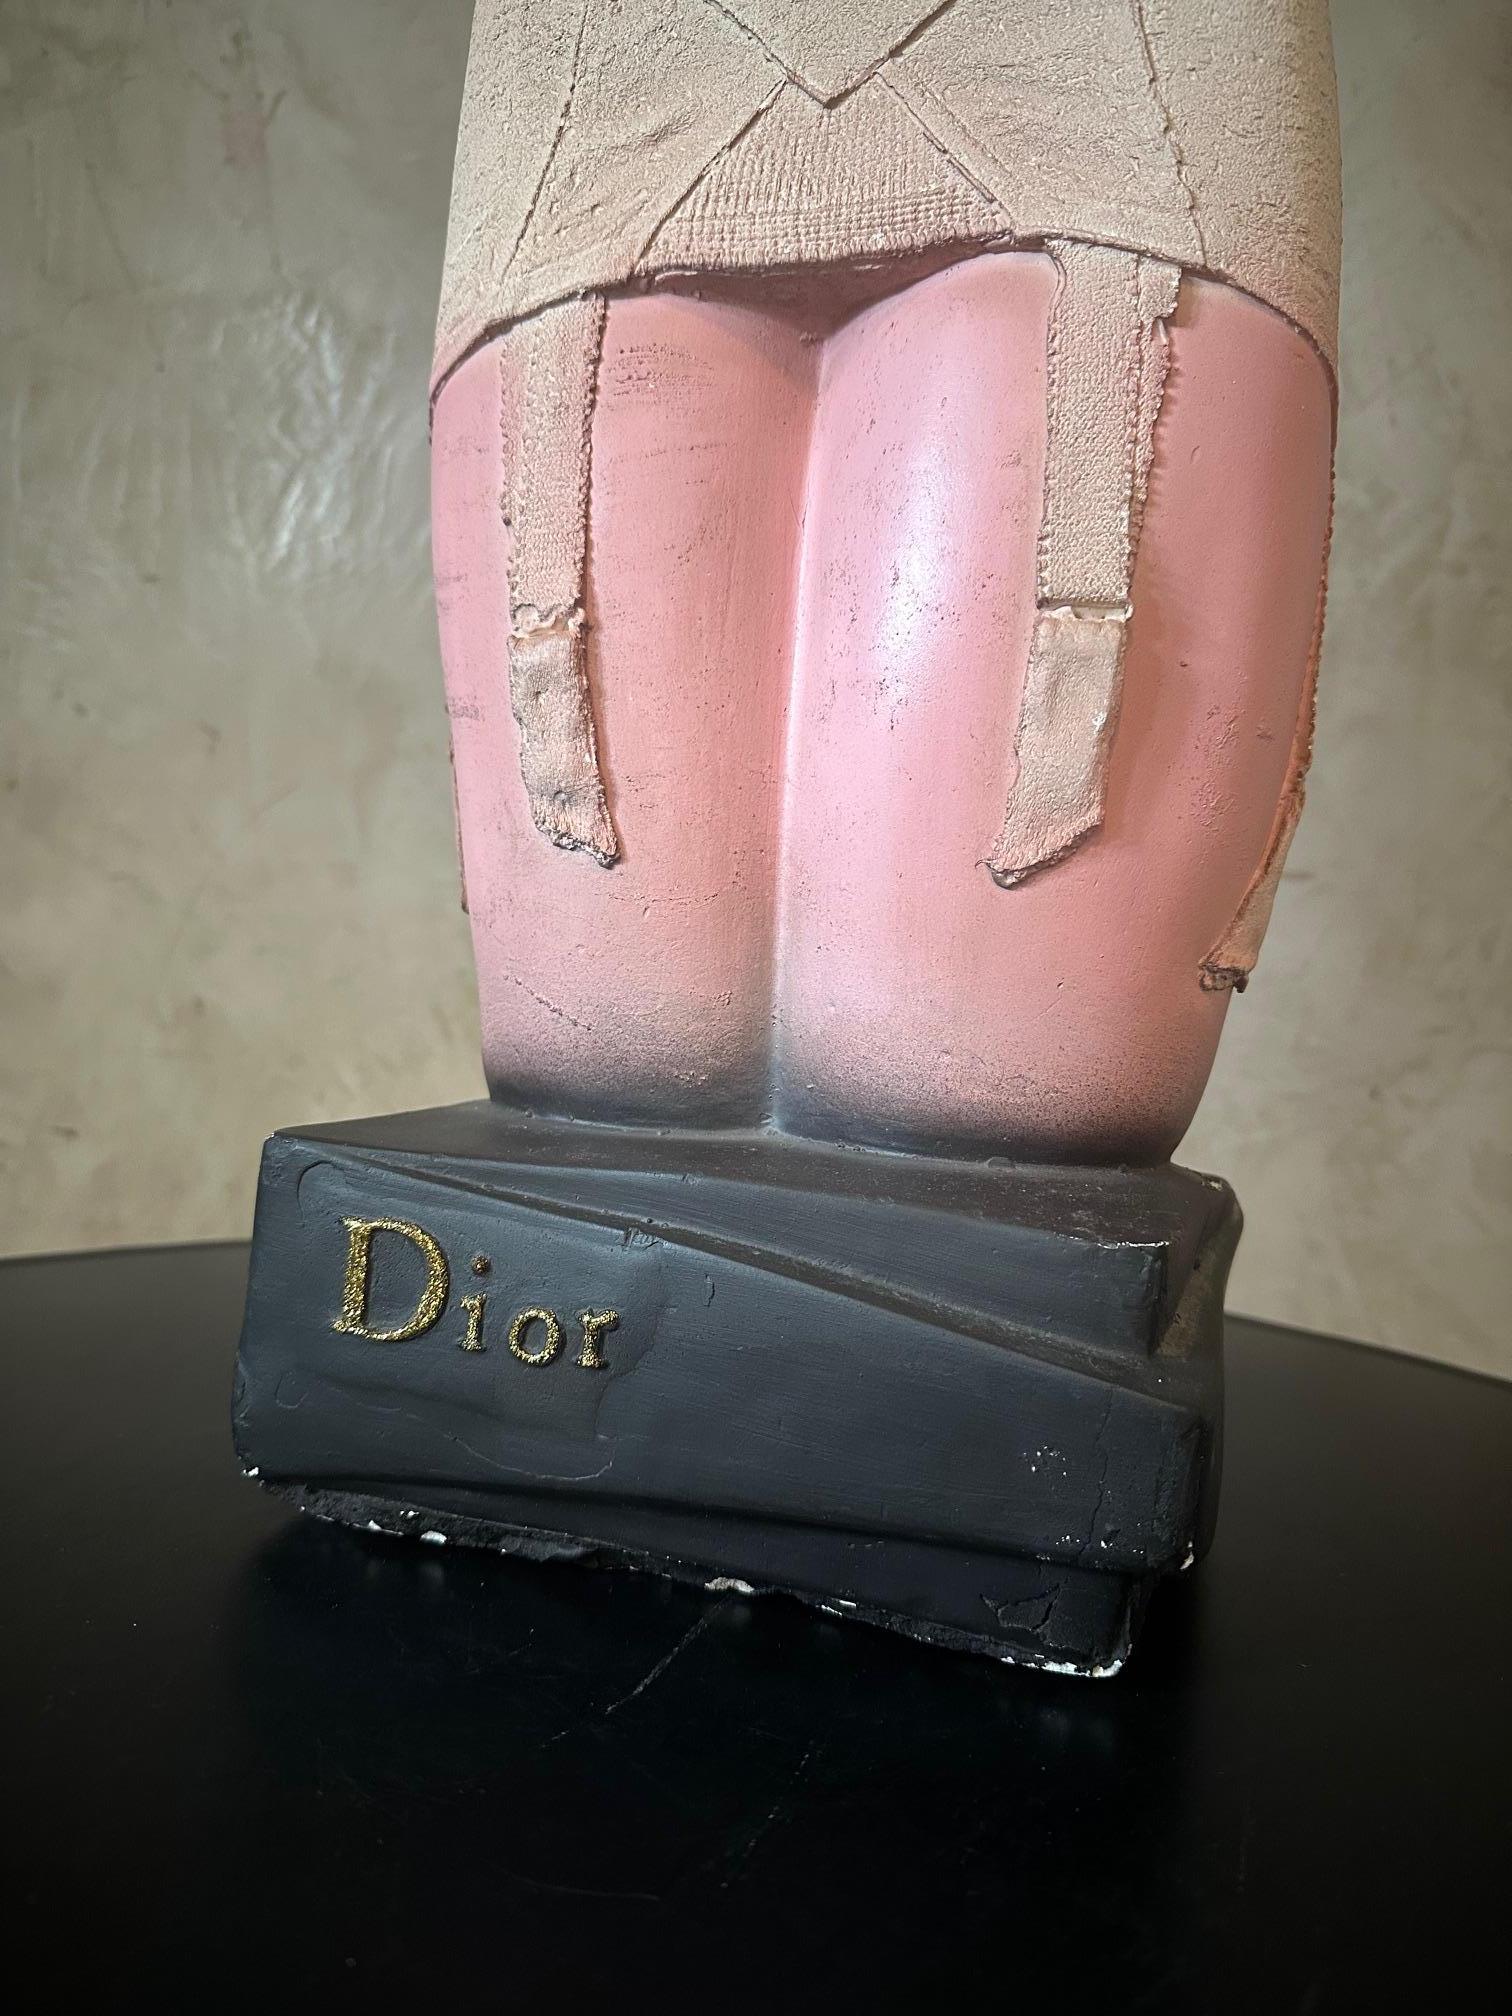 20th century French Plaster Bust For Dior Advertisement, 1950s For Sale 1